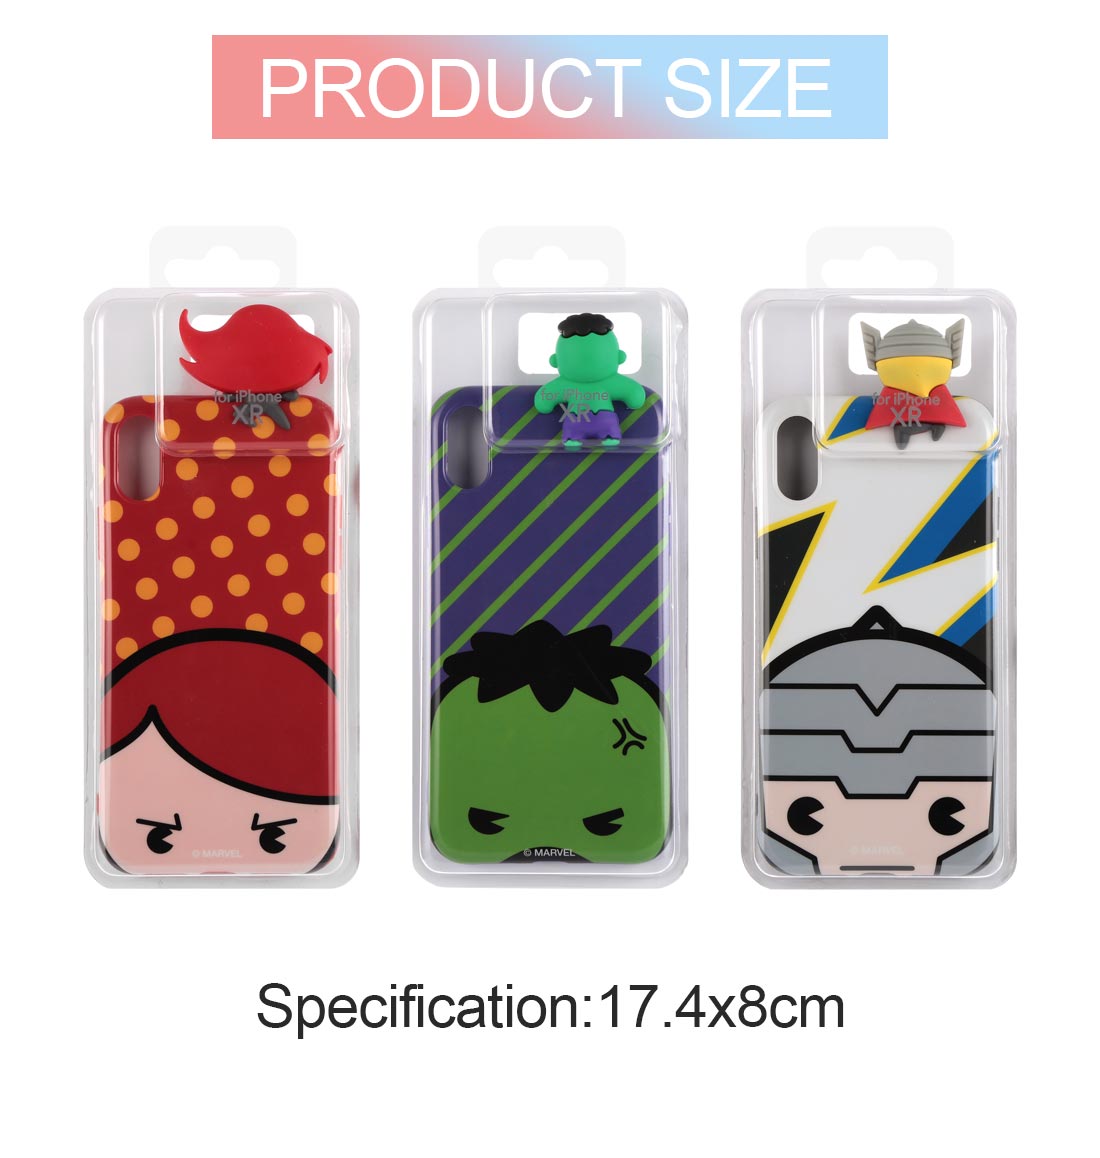 Miniso MARVEL Phone Case for iPhone XR 2007281412100